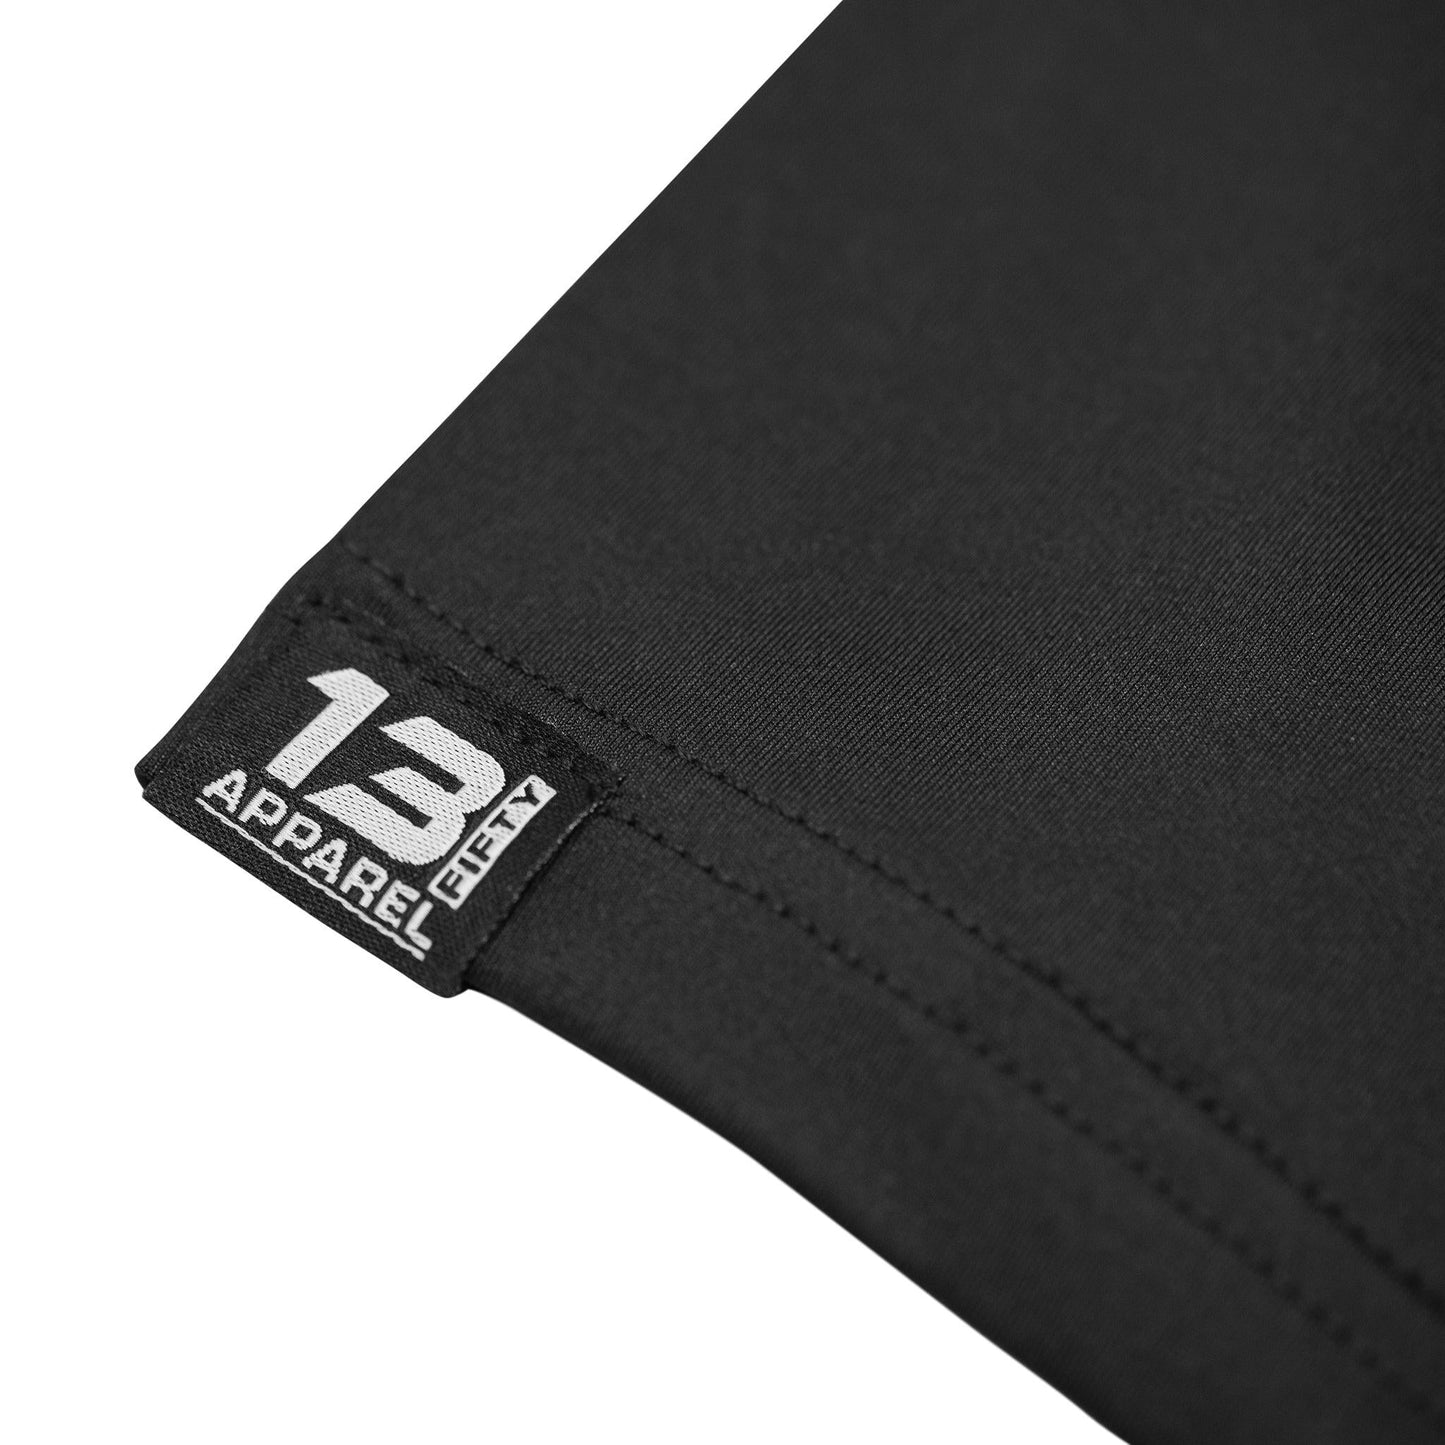 [PROBATION] Men's Performance Polo [BLK/GRY]-13 Fifty Apparel